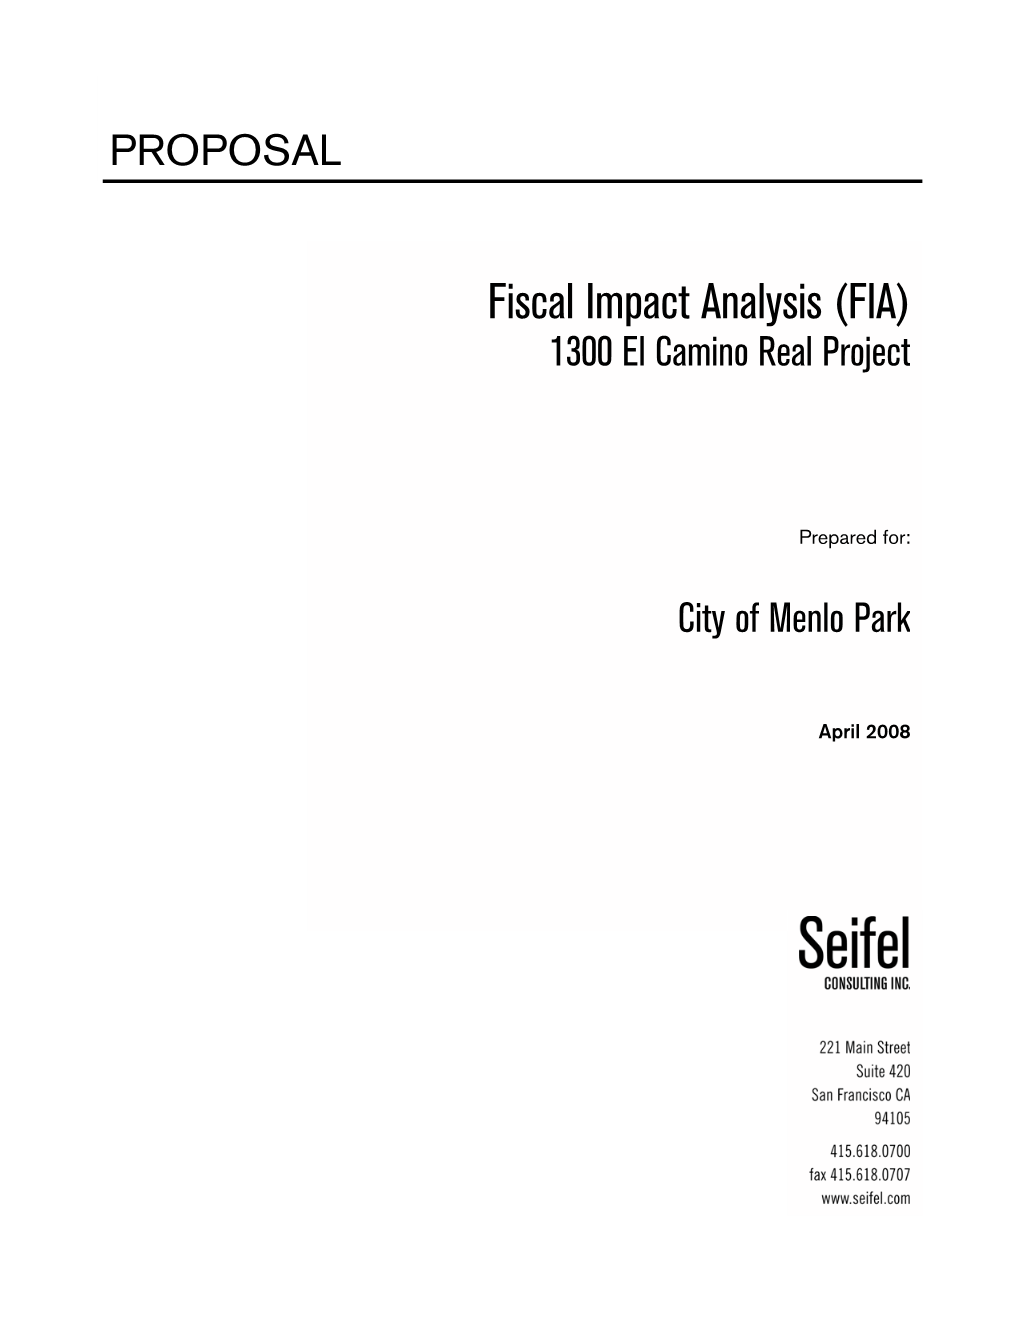 Fiscal Impact Analysis (FIA) 1300 El Camino Real Project